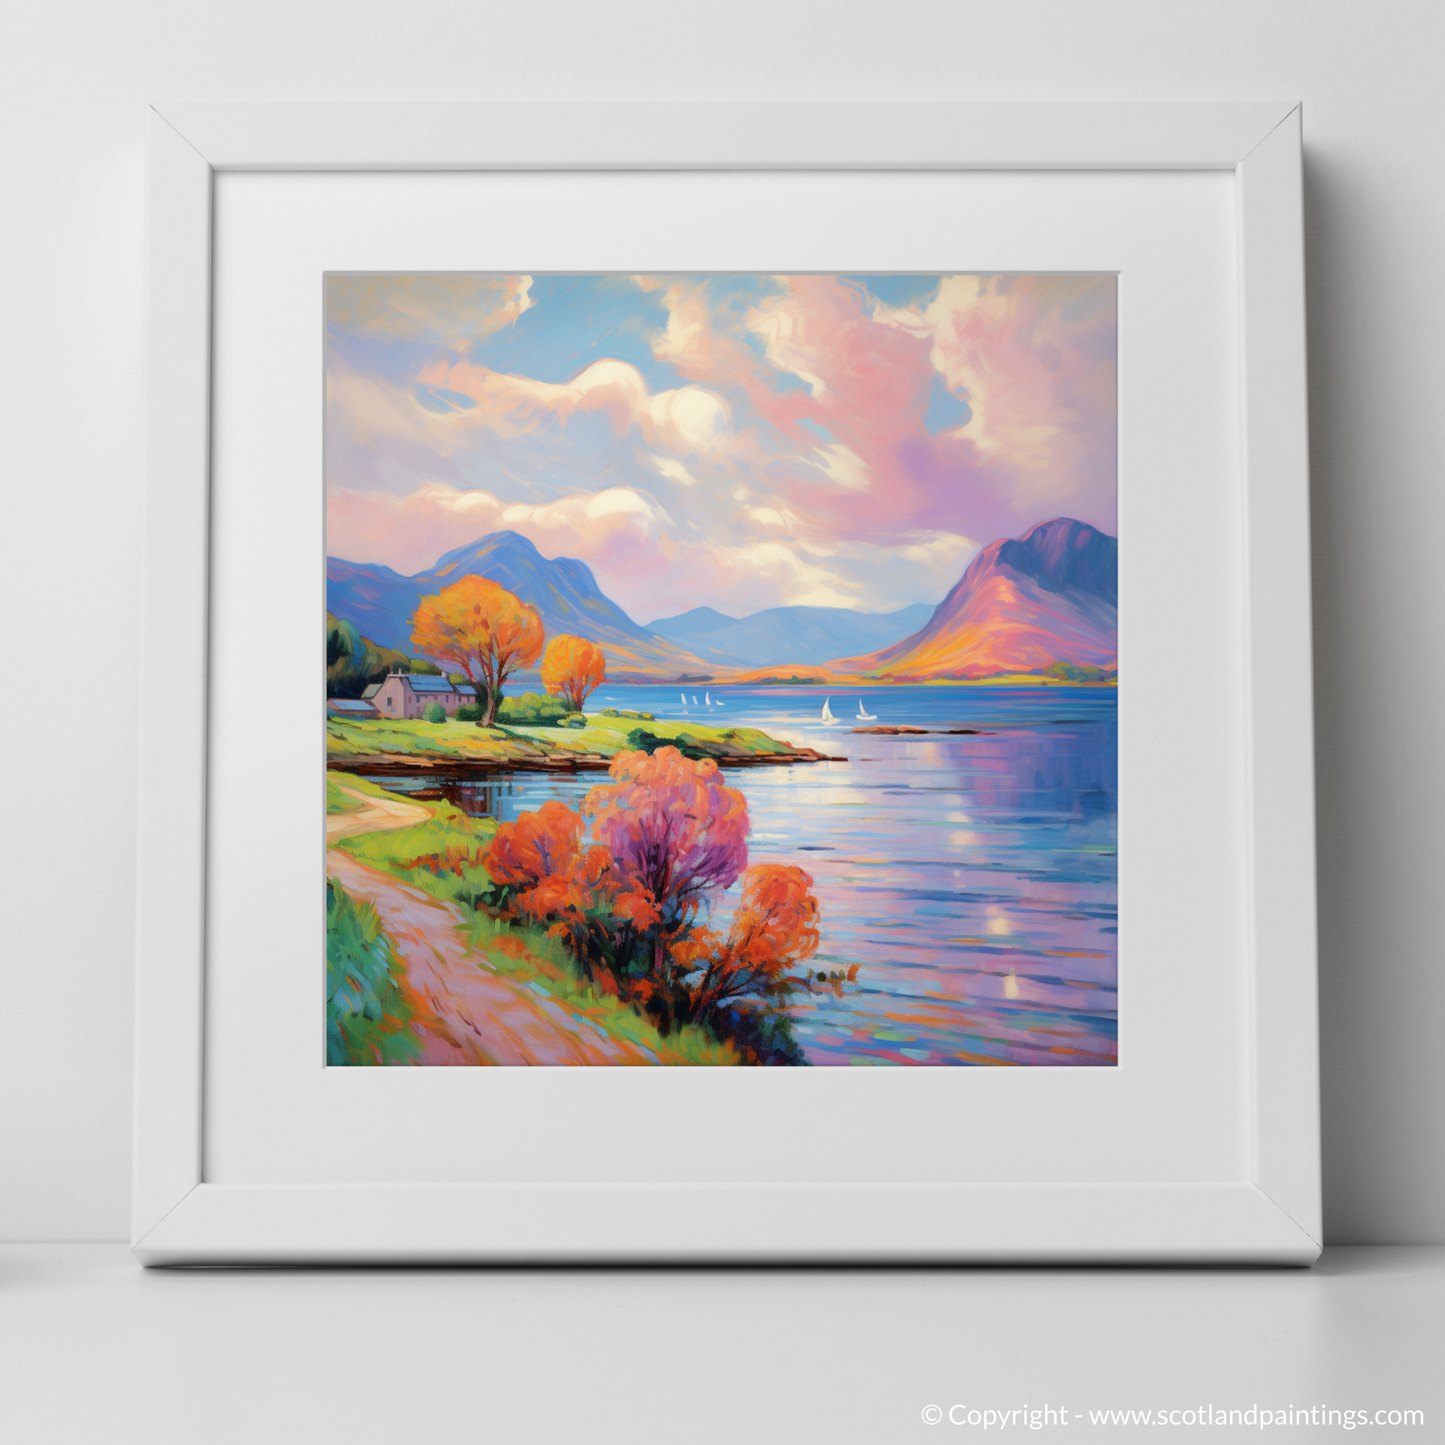 Art Print of Loch Leven, Highlands in summer with a white frame